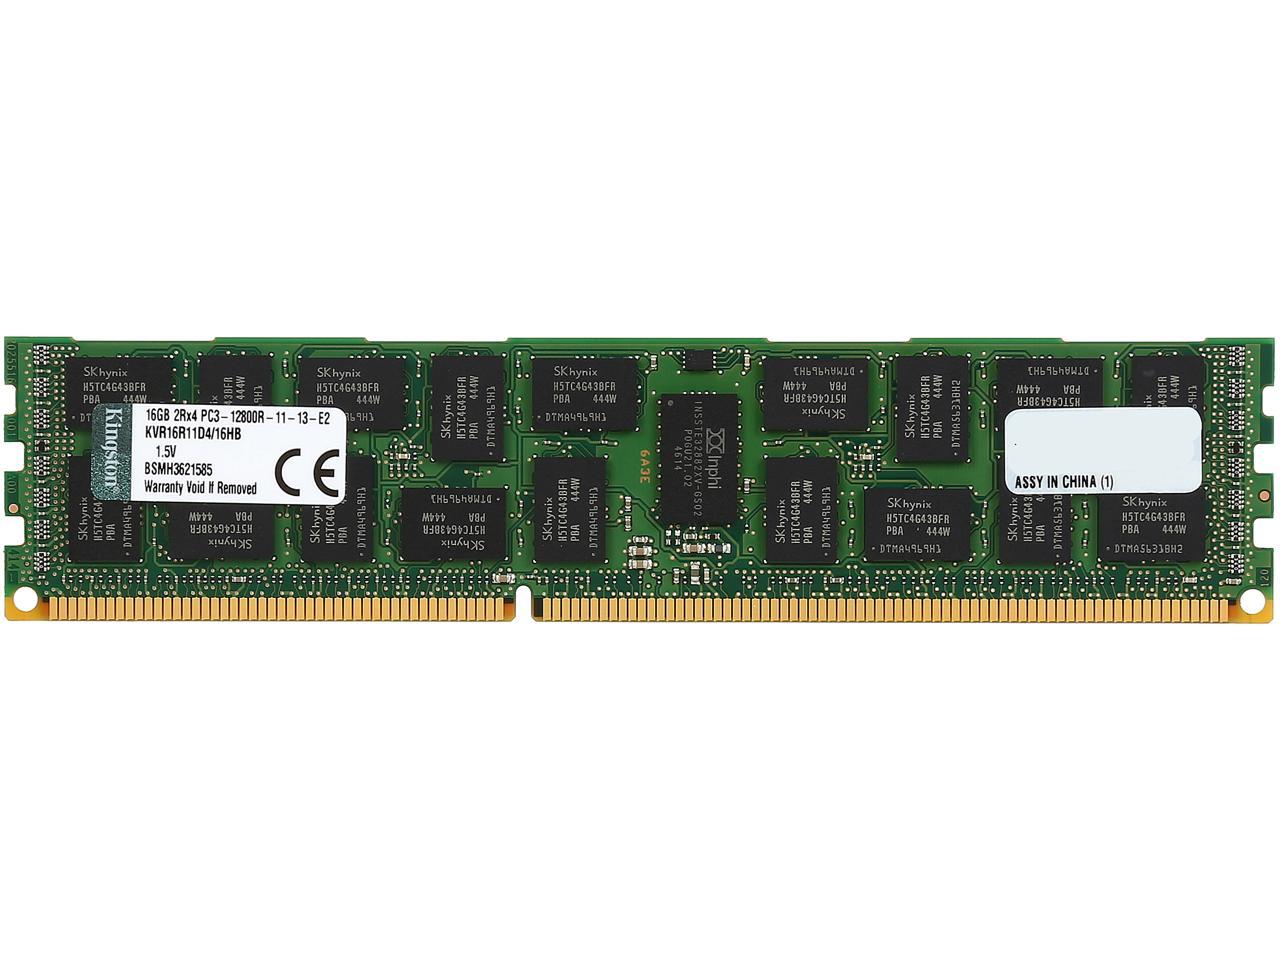 MemoryMasters 8GB Memory Upgrade for Supermicro X9SCL+-F Motherboard DDR3 1333MHz PC3-10600 ECC 2Rx8 UDIMM 